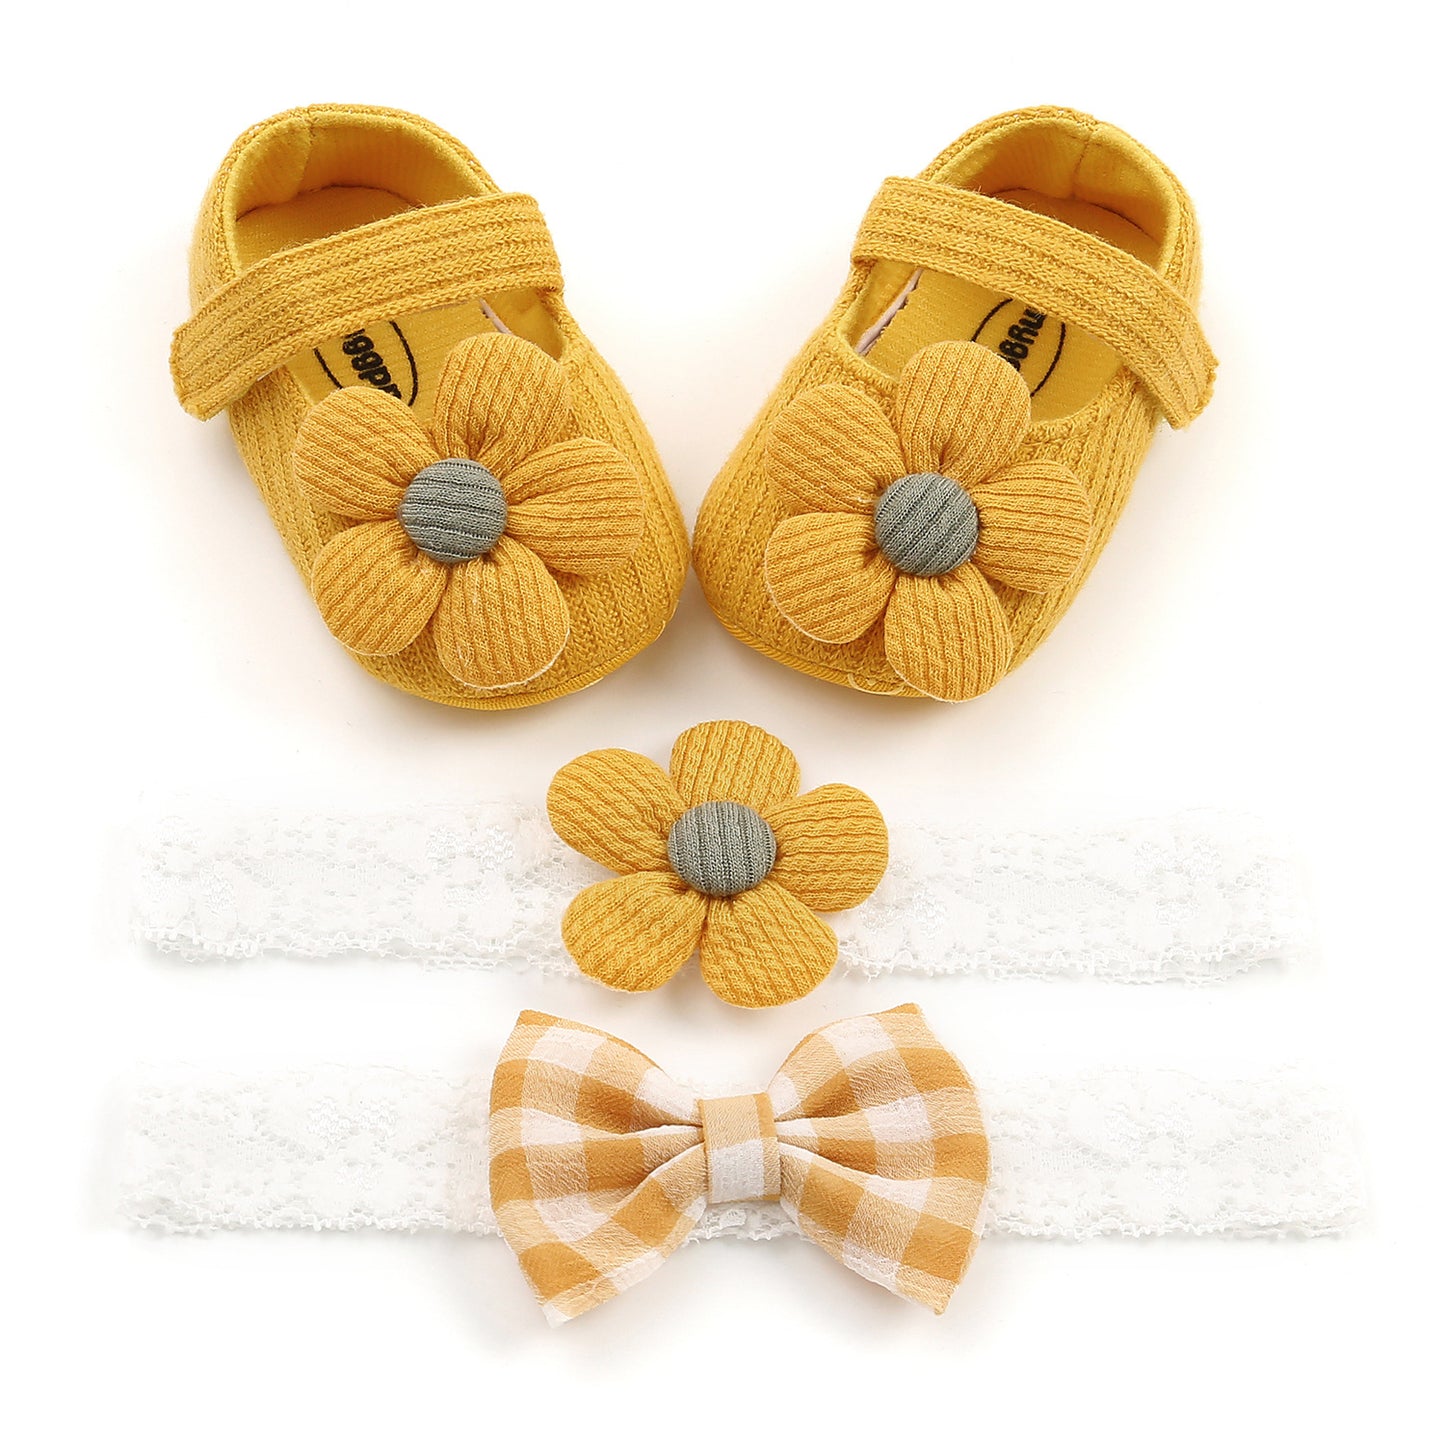 Baby Soft-Soled Toddler Shoes, Baby Shoes, Princess Shoes, Baby Headband And Headwear 2-Piece Set